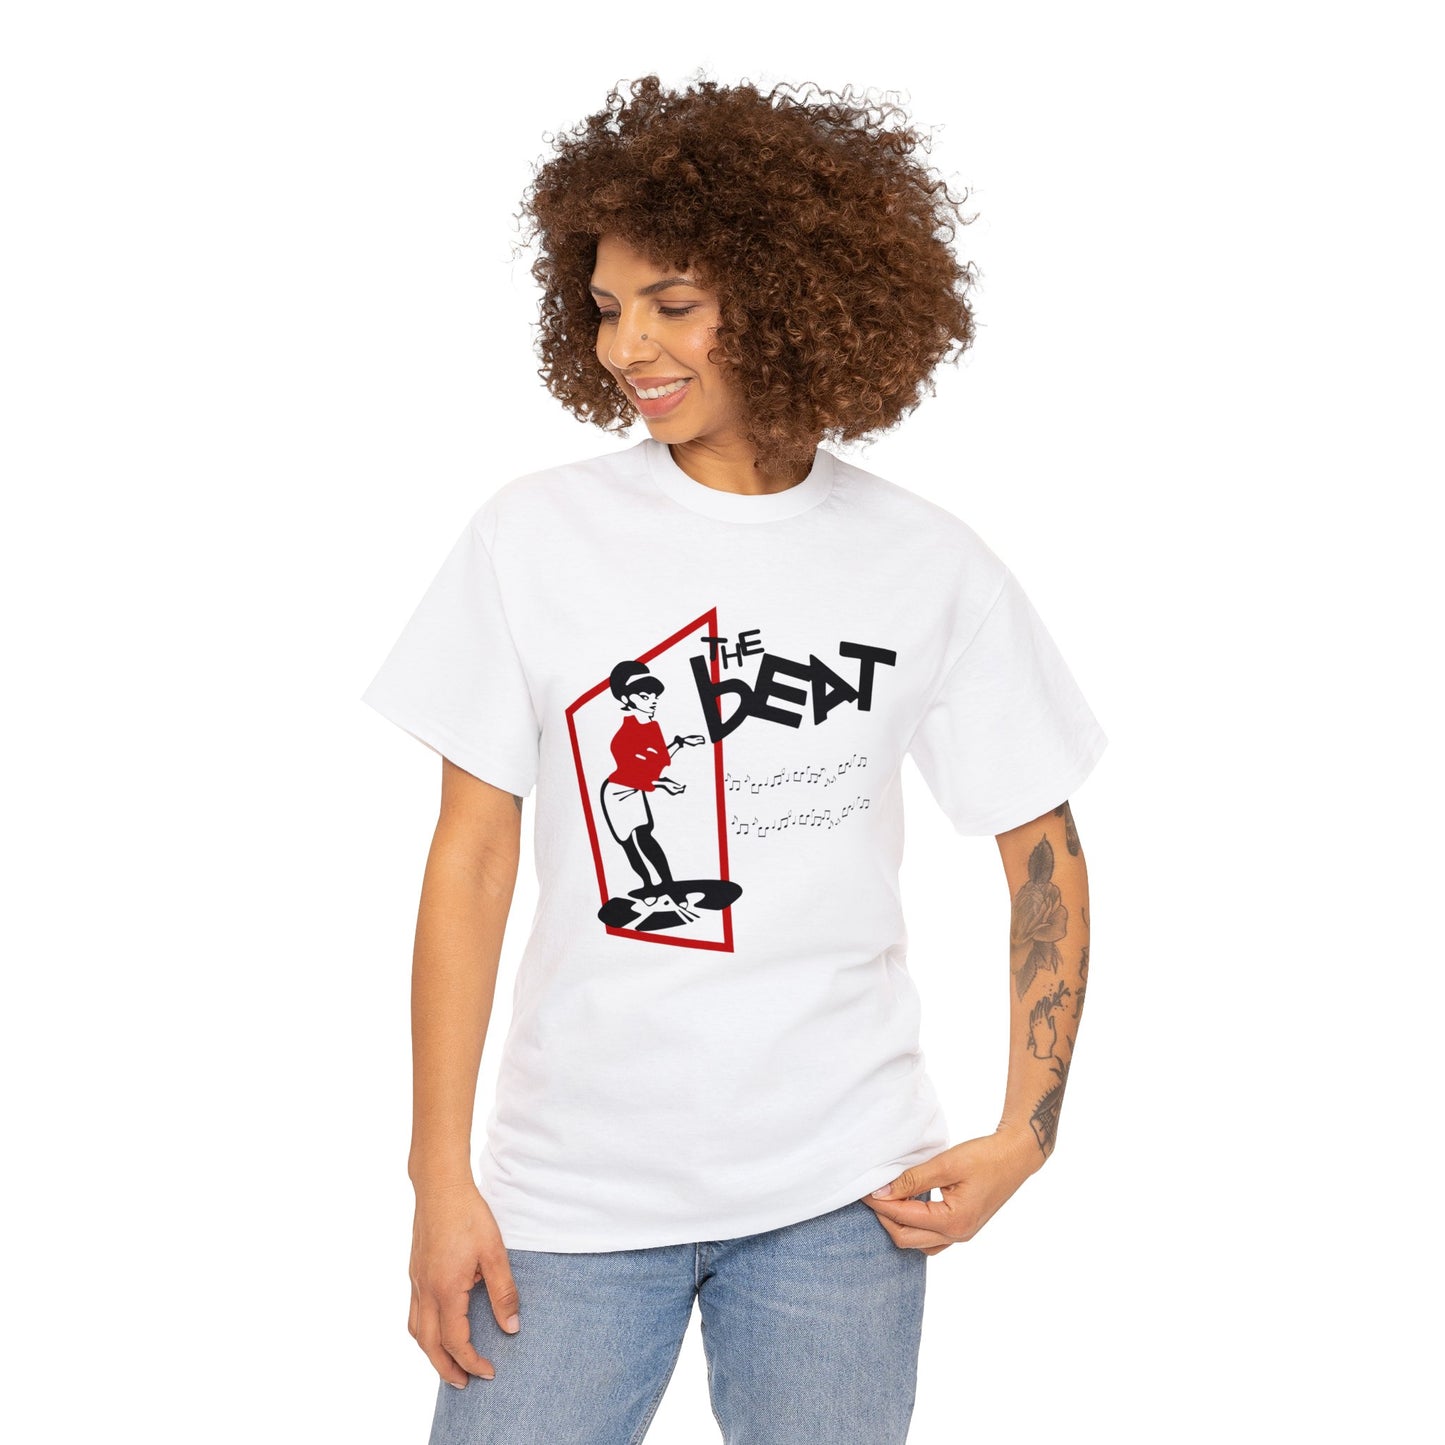 THE BEAT Rude Girl English Band T-shirt for Sale